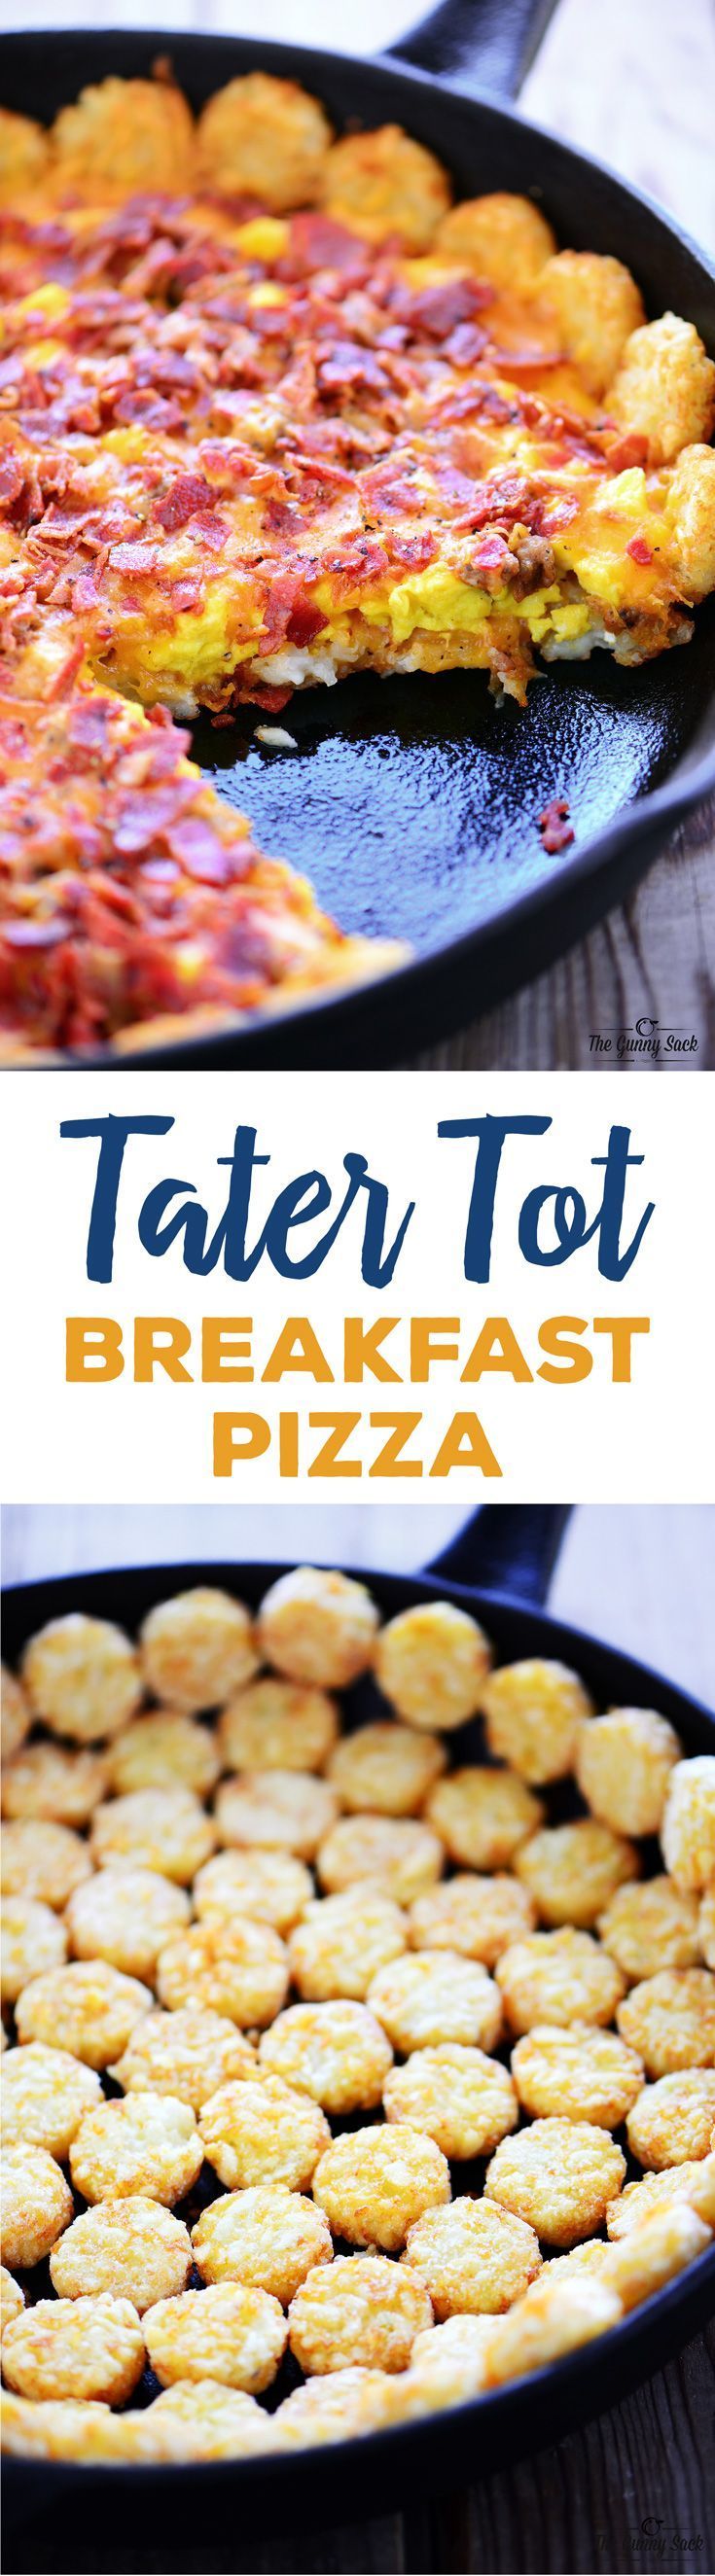 Tater Tot Breakfast Pizza recipe with crispy potatoes, scrambled eggs, melted cheese, crispy bacon and sau